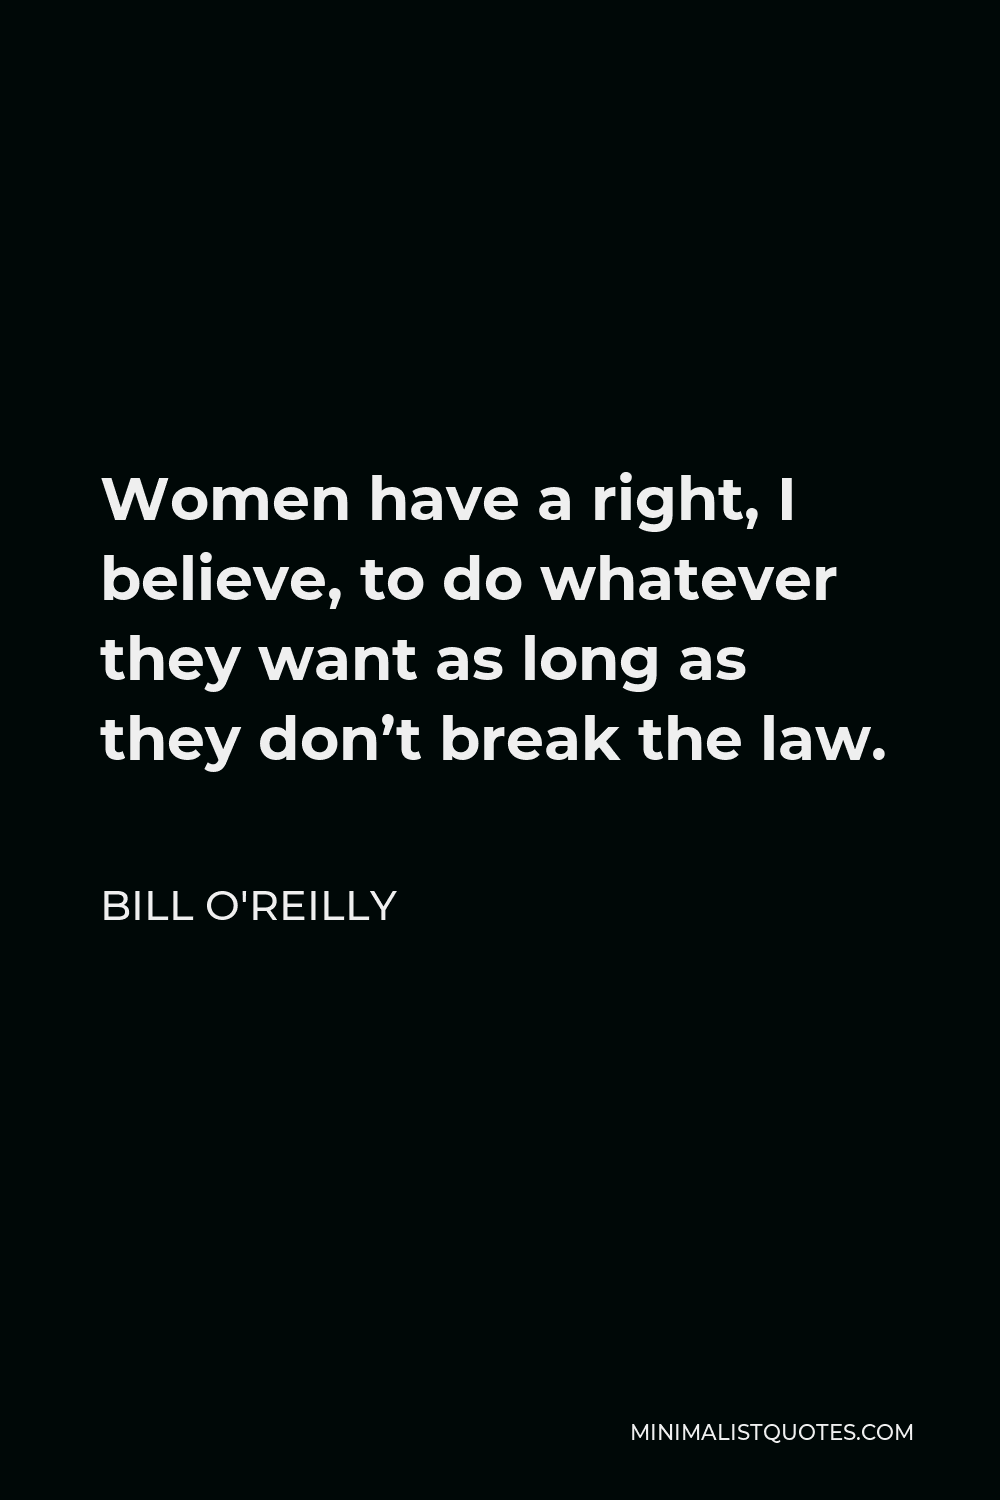 Bill O'Reilly Quote - Women have a right, I believe, to do whatever they want as long as they don’t break the law.